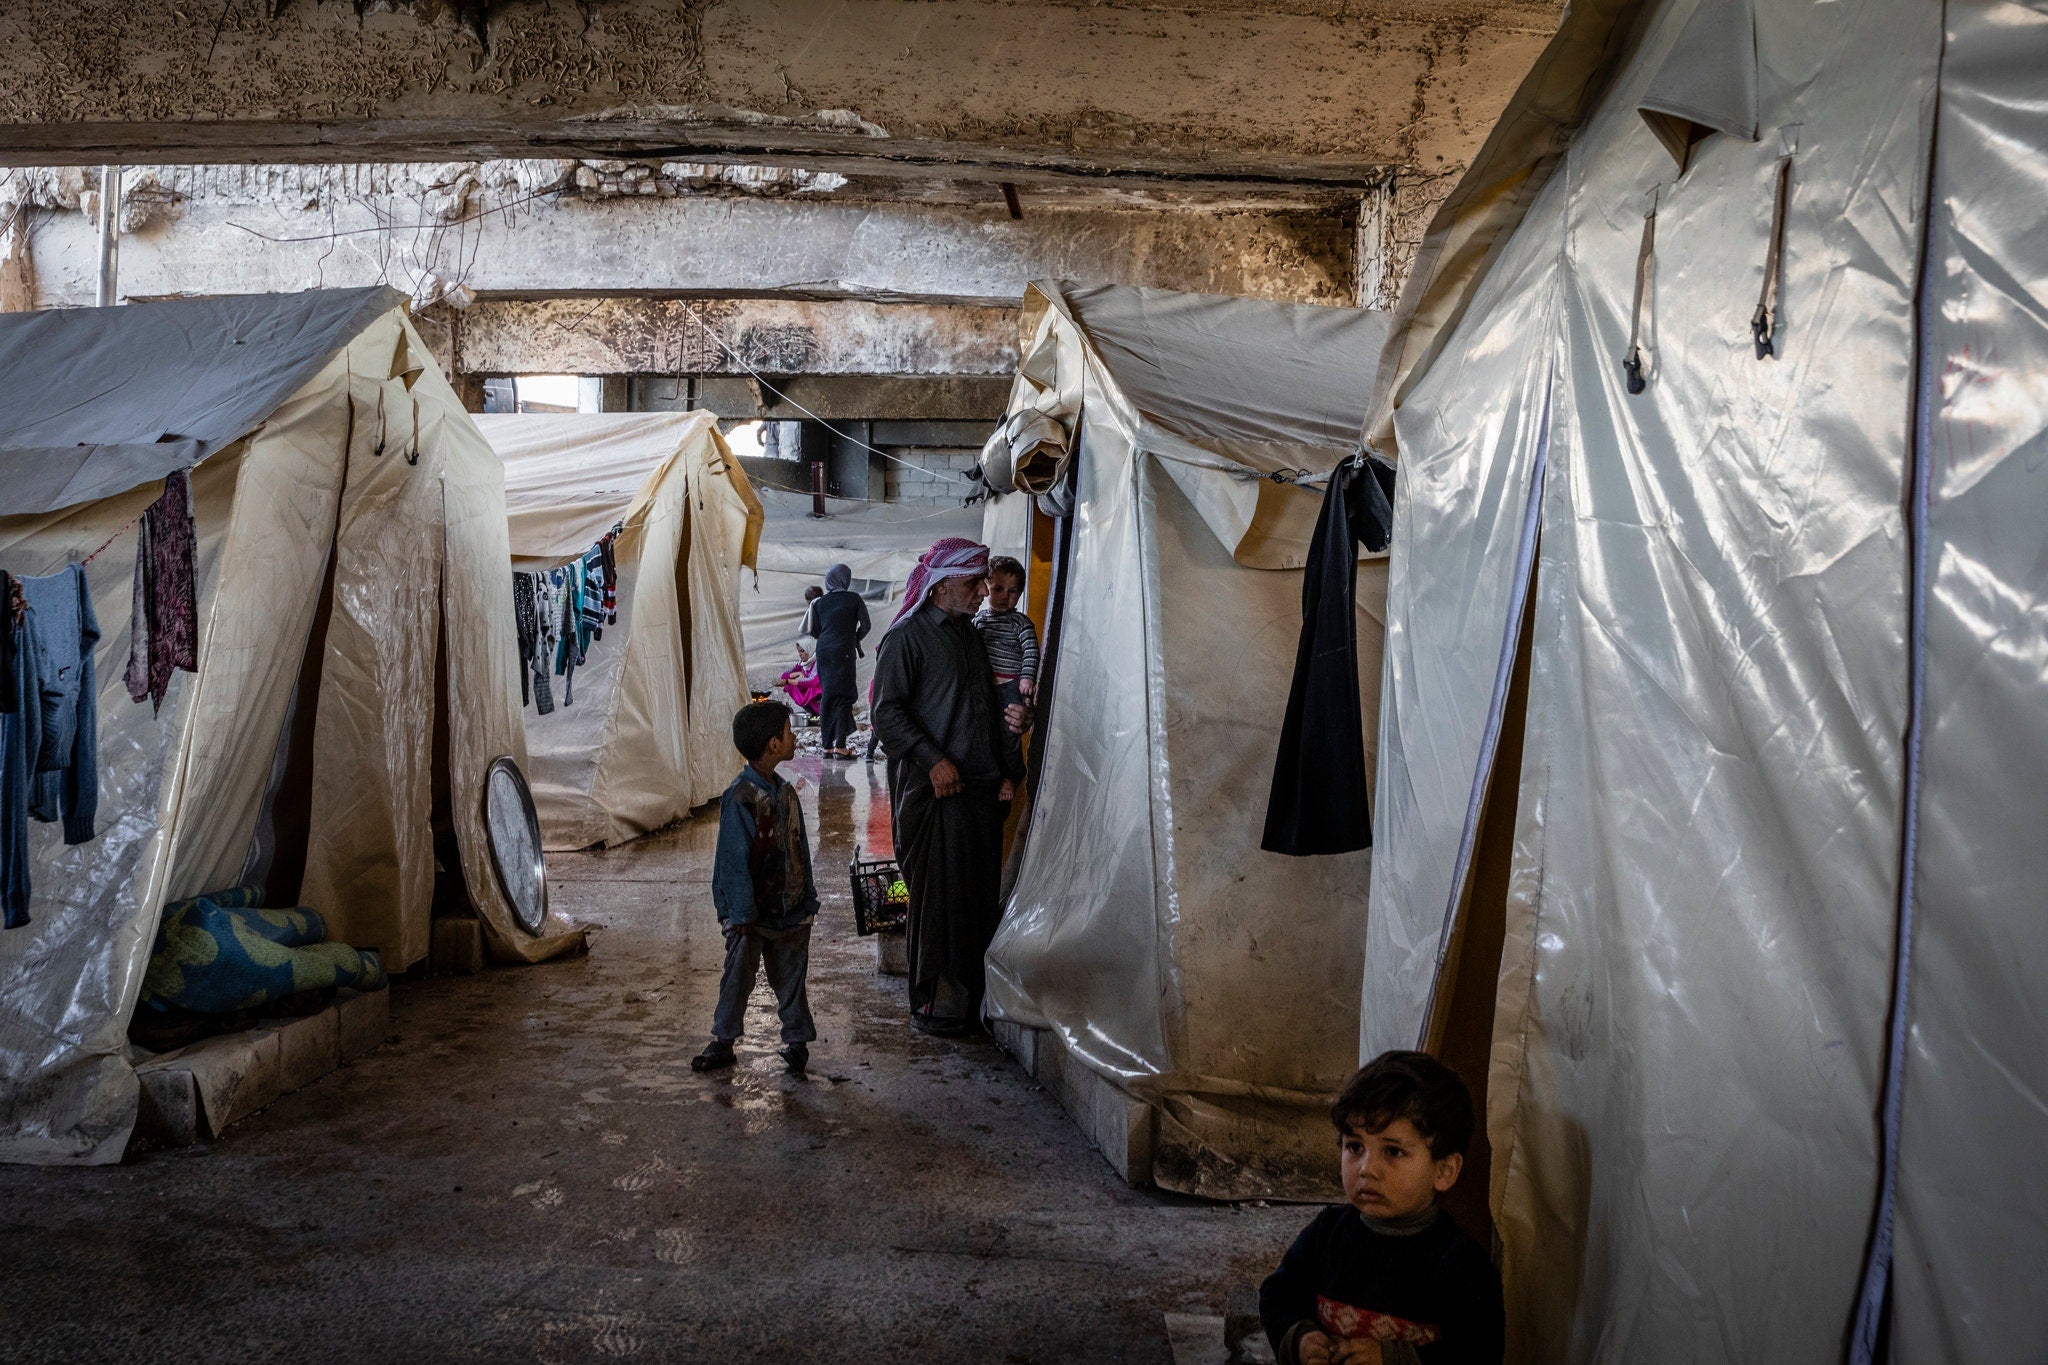 Syrian families, displaced by recent fighting, living in tents underneath a sports stadium in Idlib, Syria.